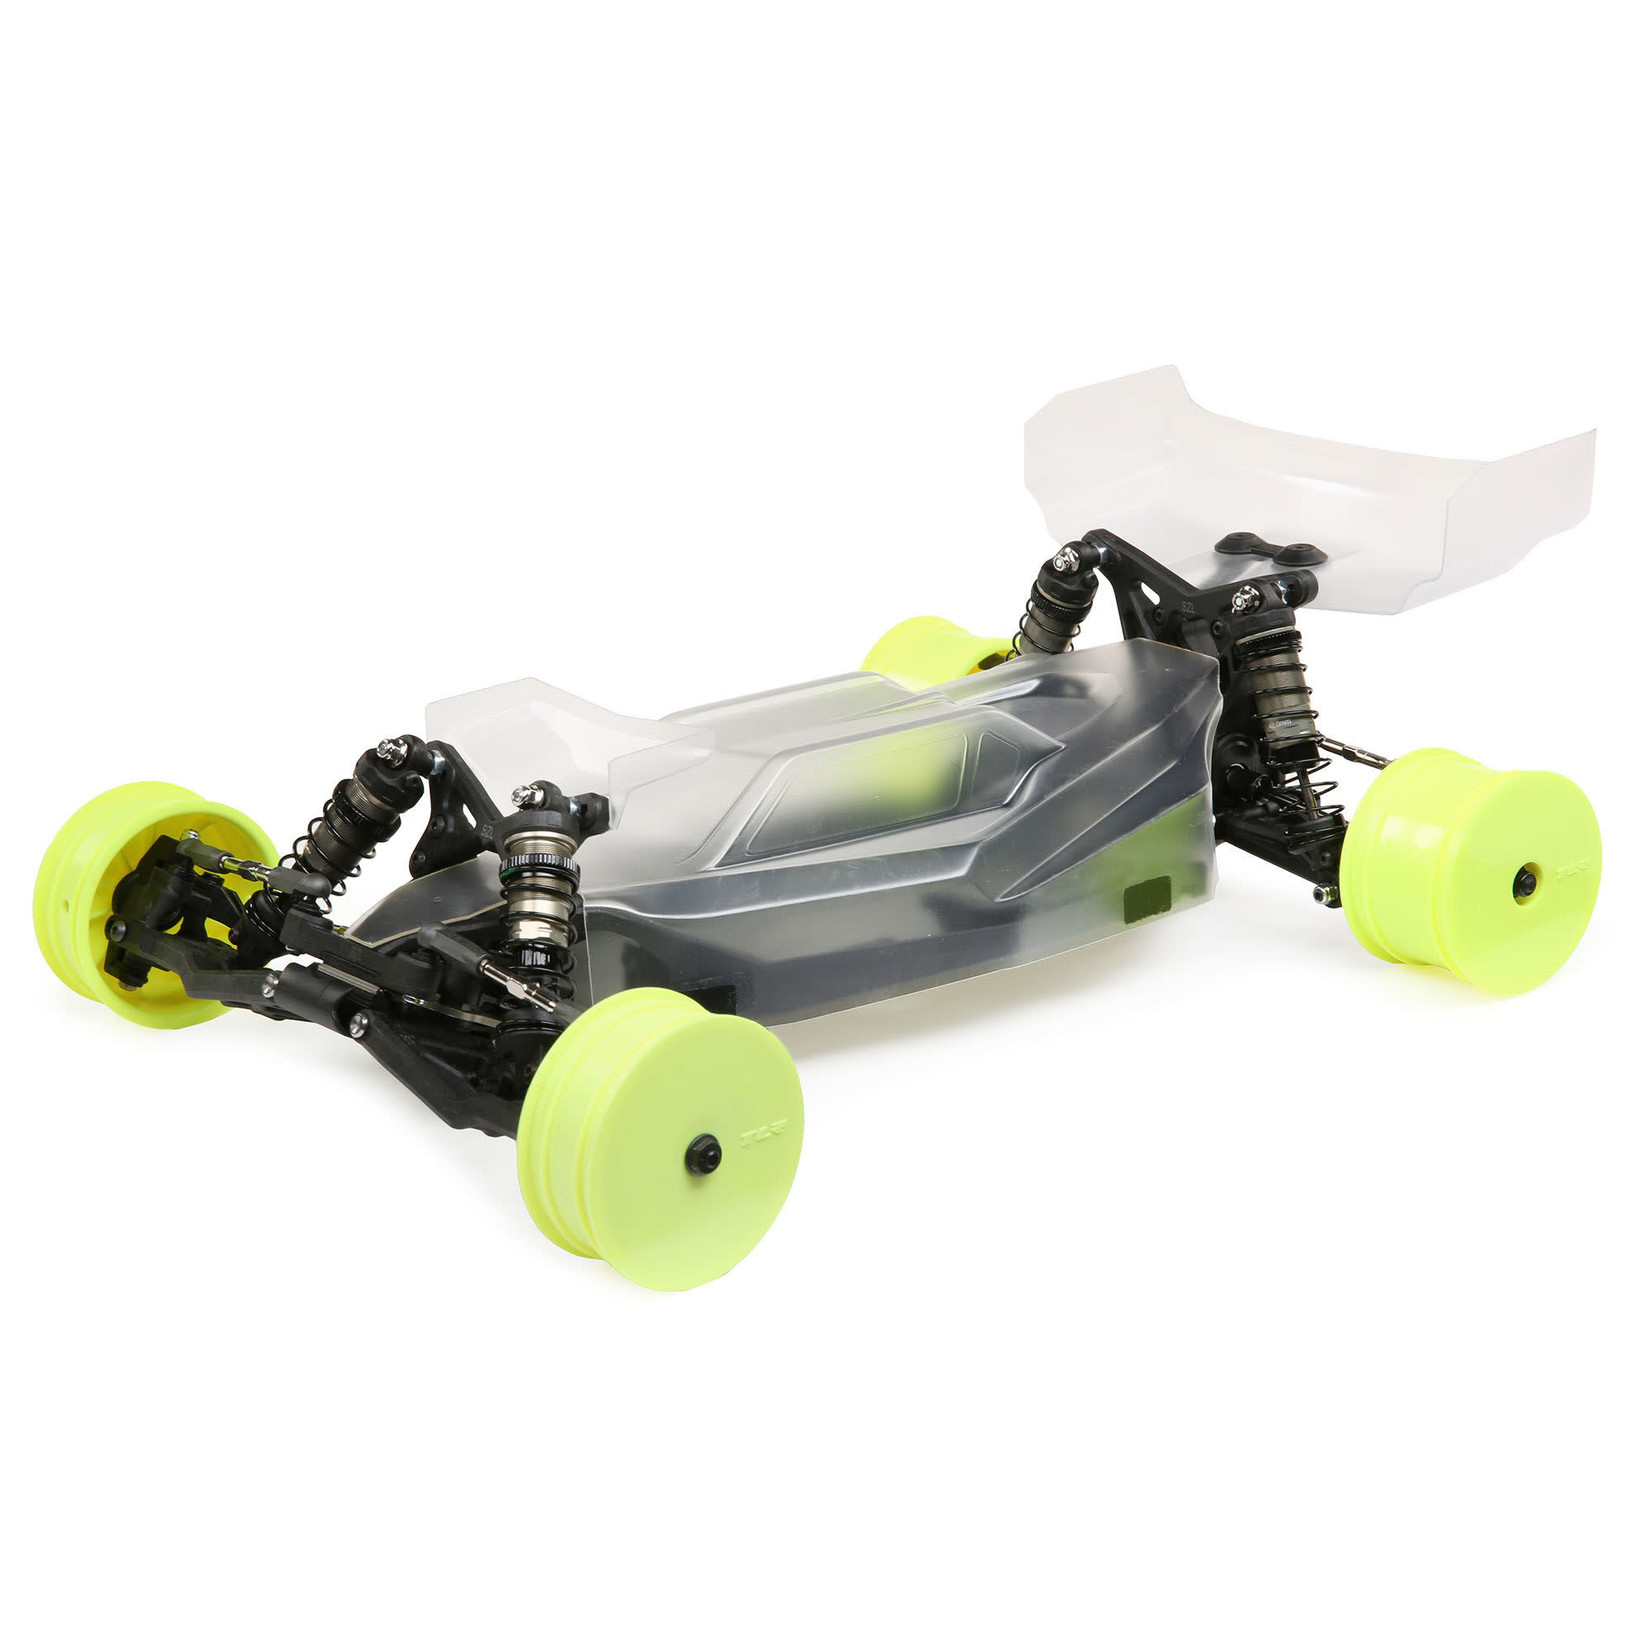 TLR TLR03012 TLR 22 5.0 DC Race Roller 1/10 2WD Electric Buggy Kit (Dirt/Clay)